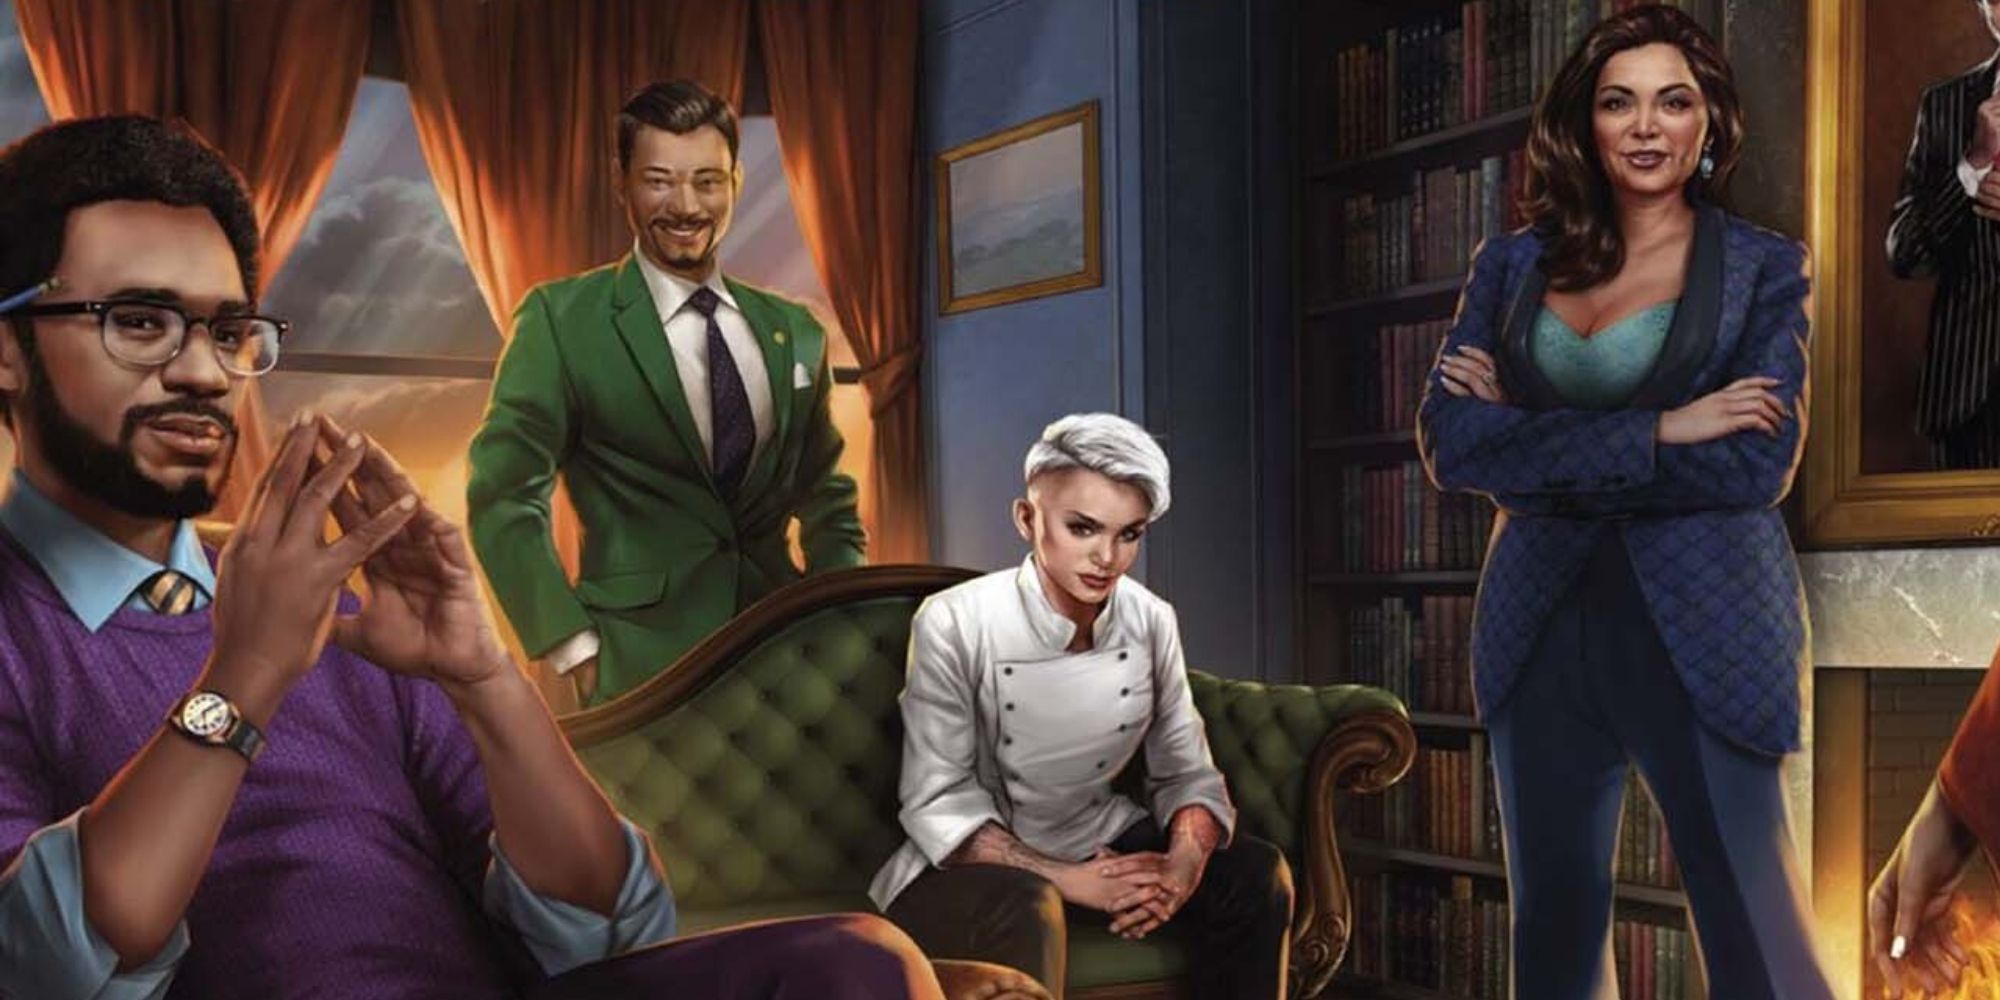 Four characters from Hasbro's new version of Clue